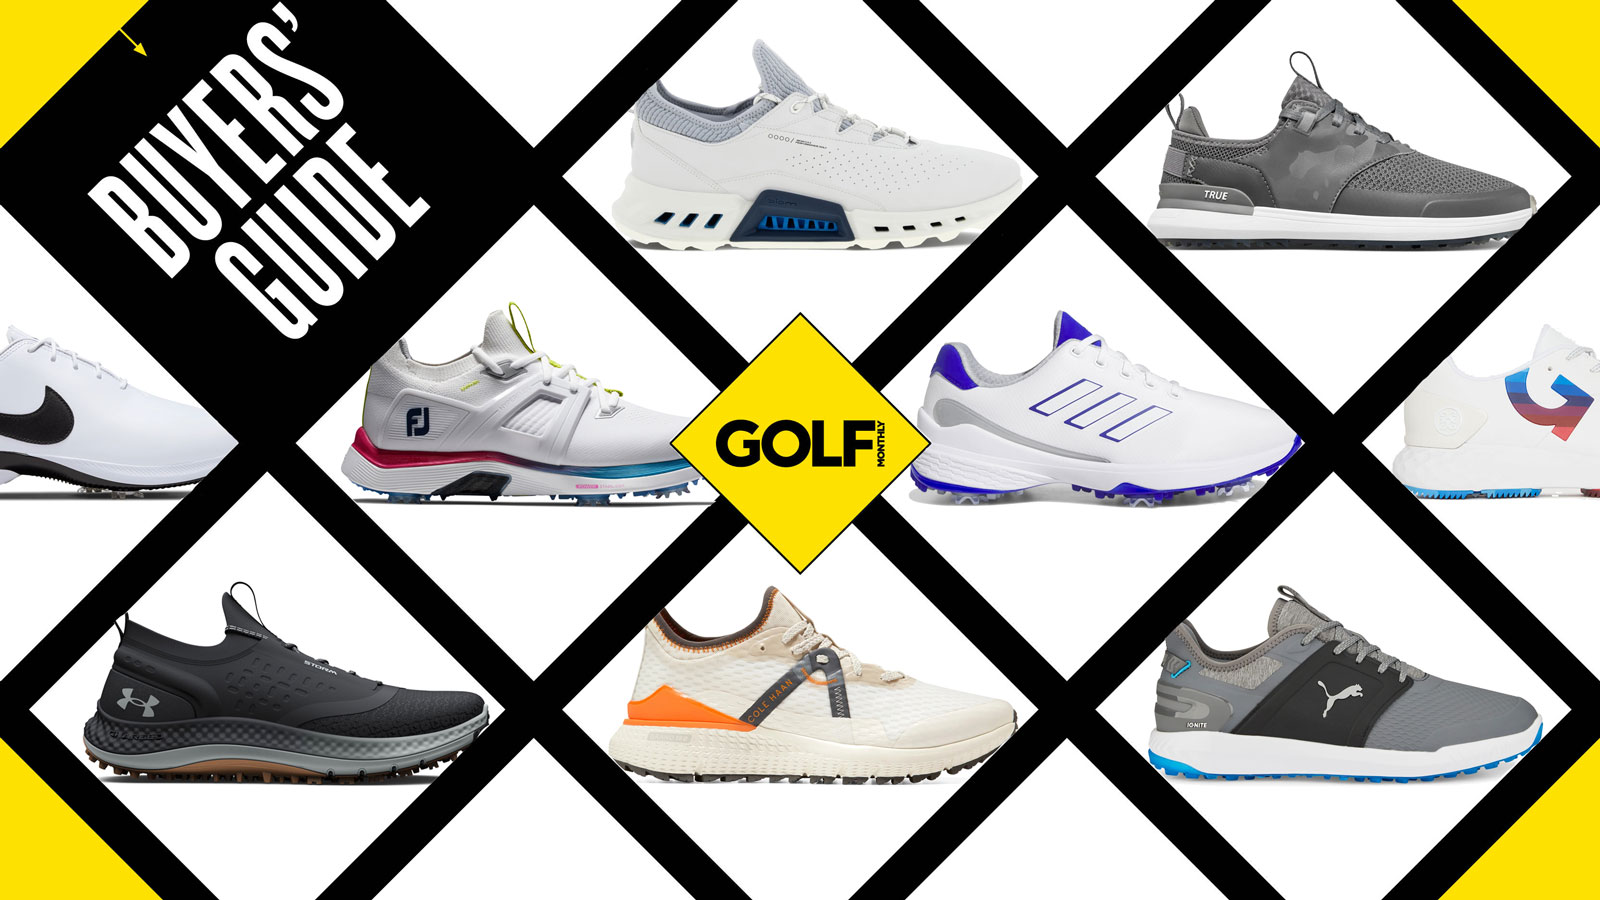 Posh vs. Sporty Sneakers: Which Side Are You On?